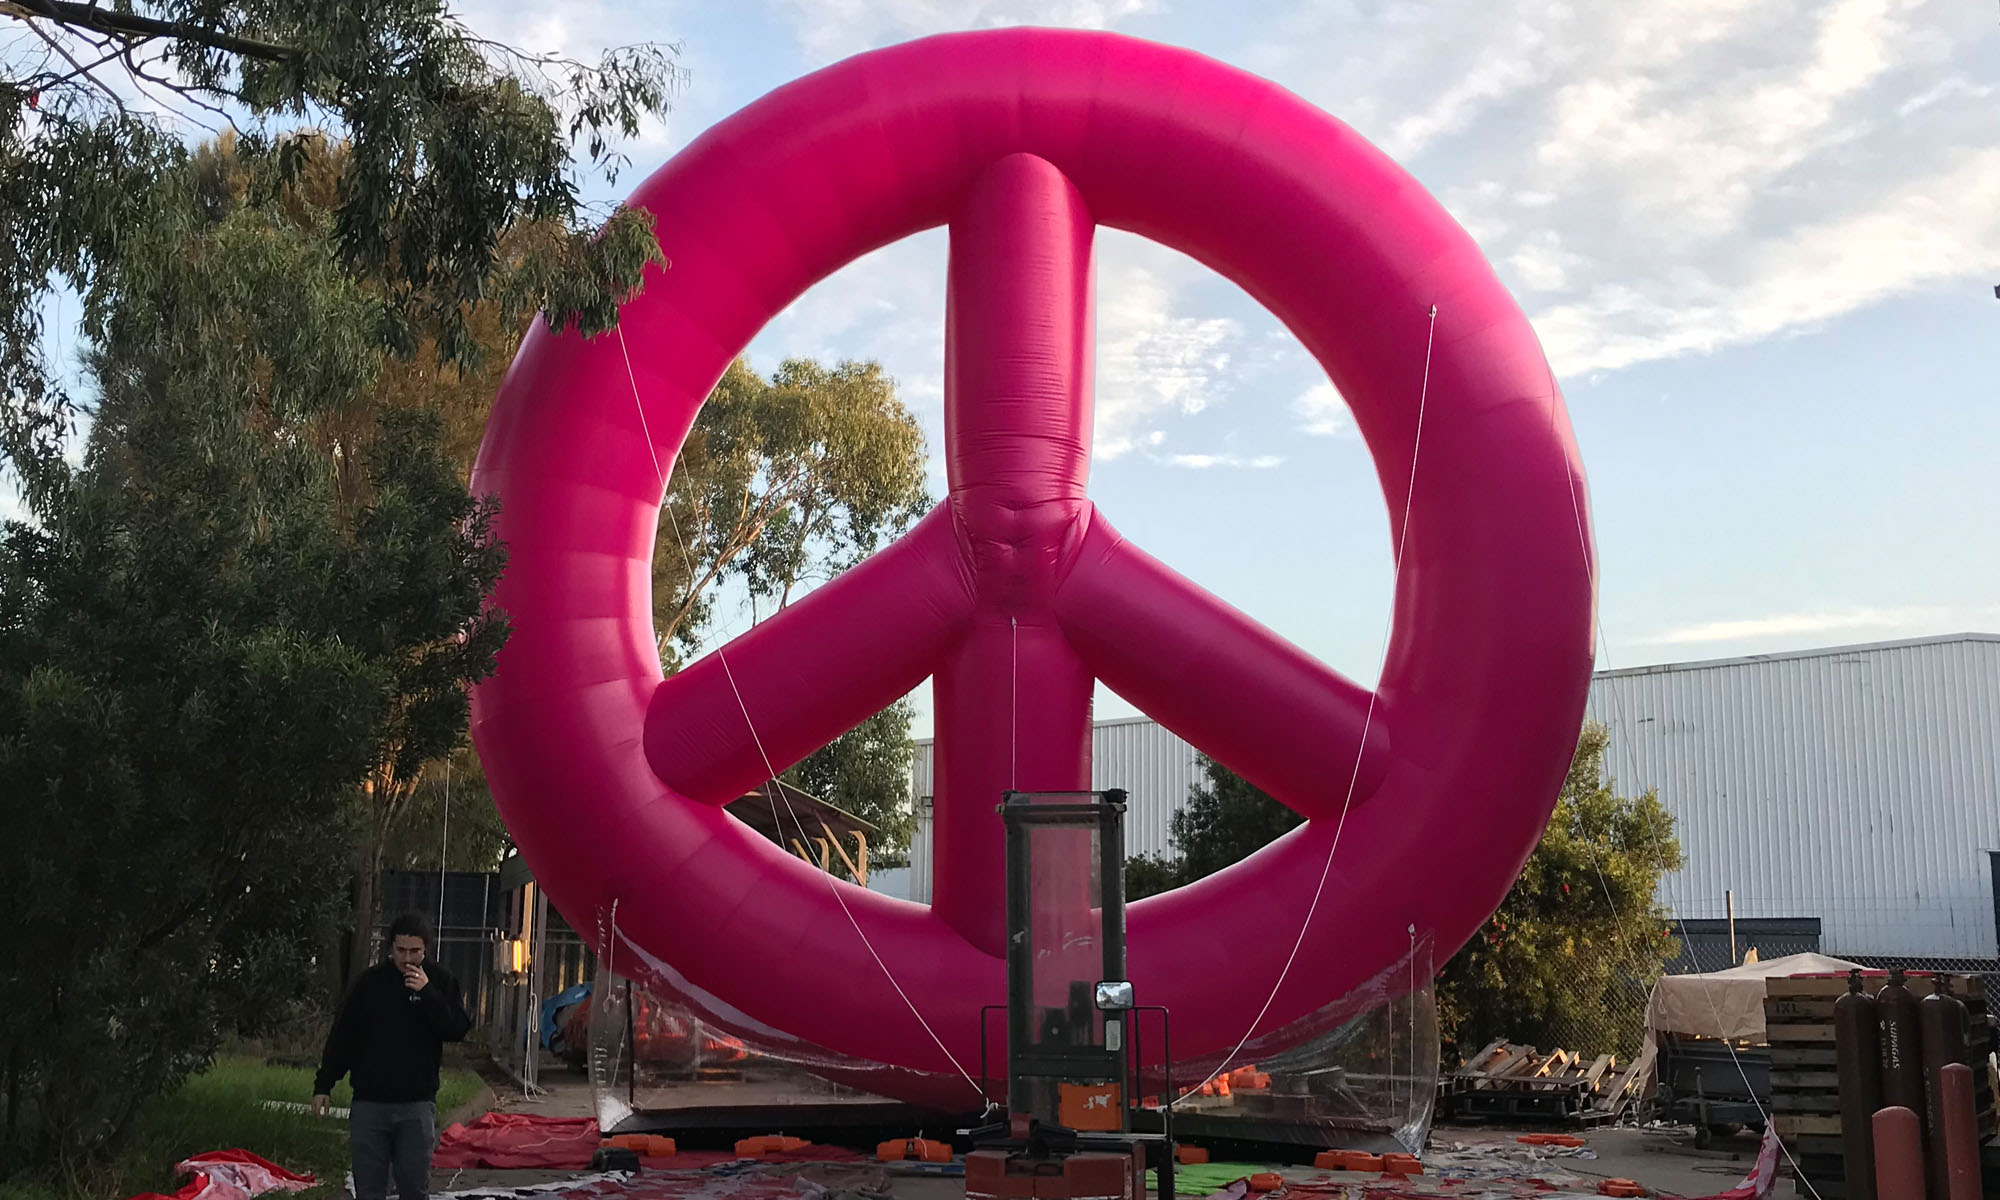 We created the peace symbol with a heavier-duty PVC material in highly vibrant pink.